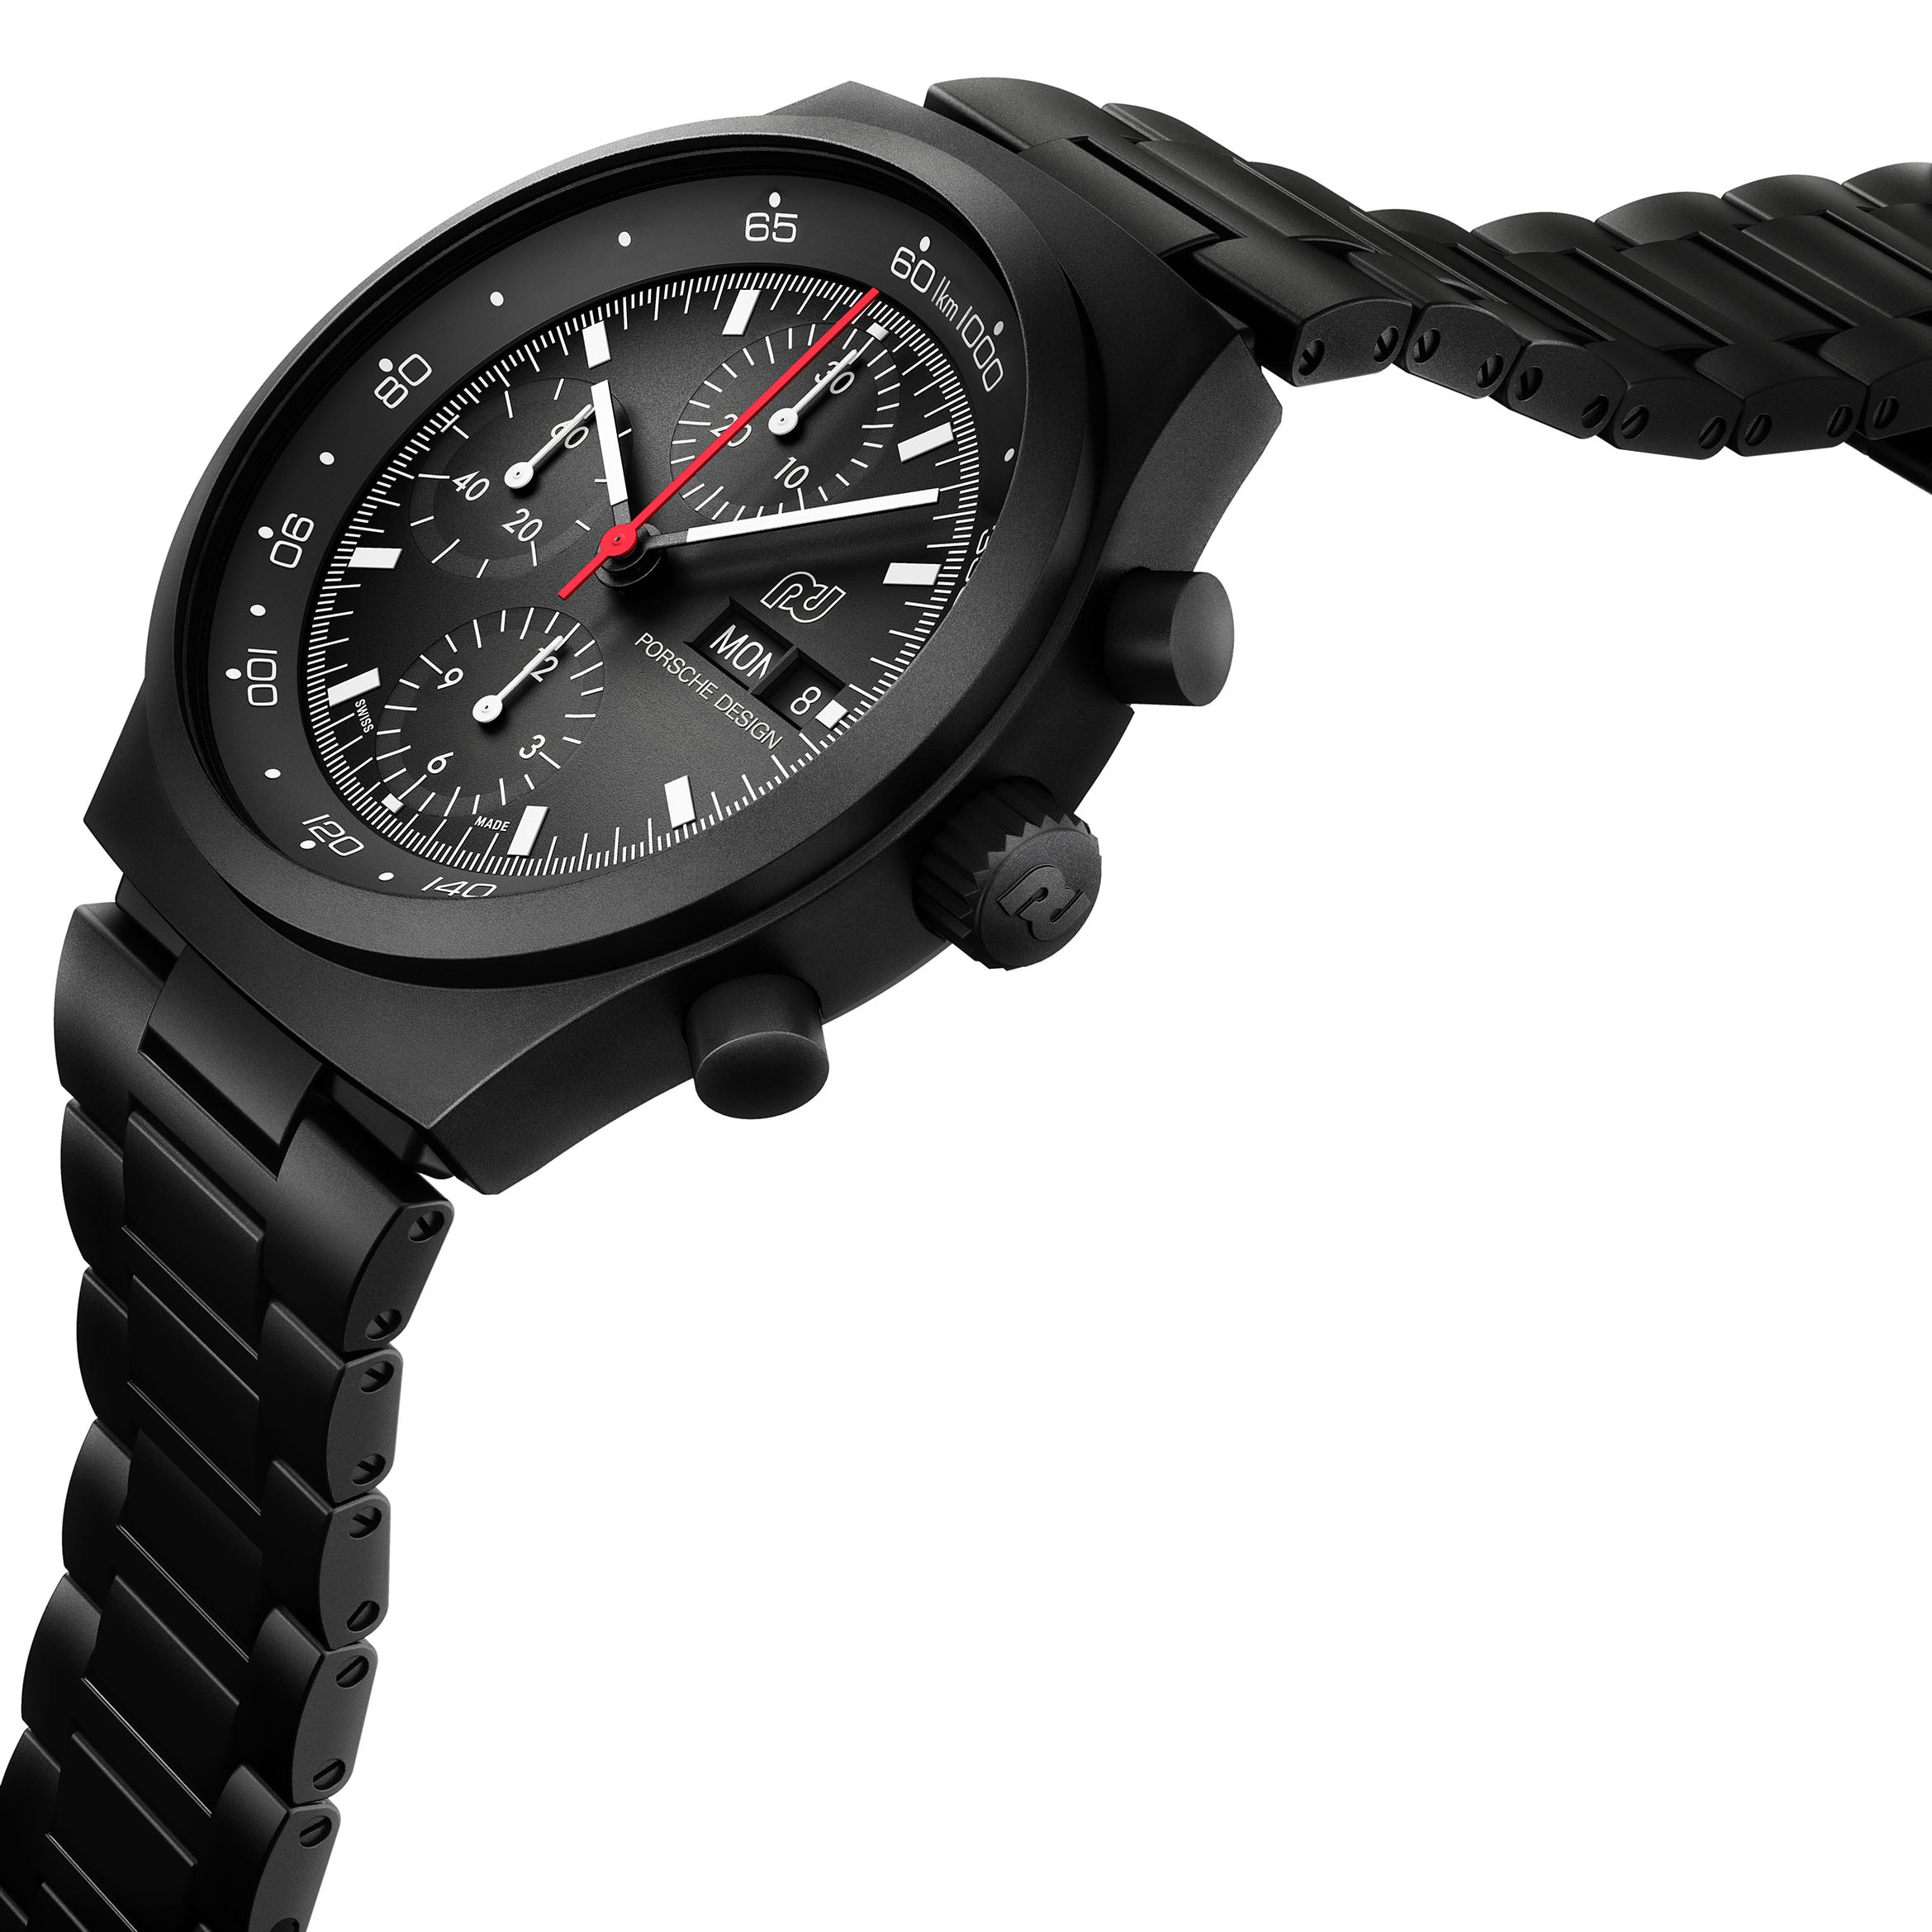 Porsche Design Celebrates 50 Years With New Chronograph 1?1972 Limited Edition